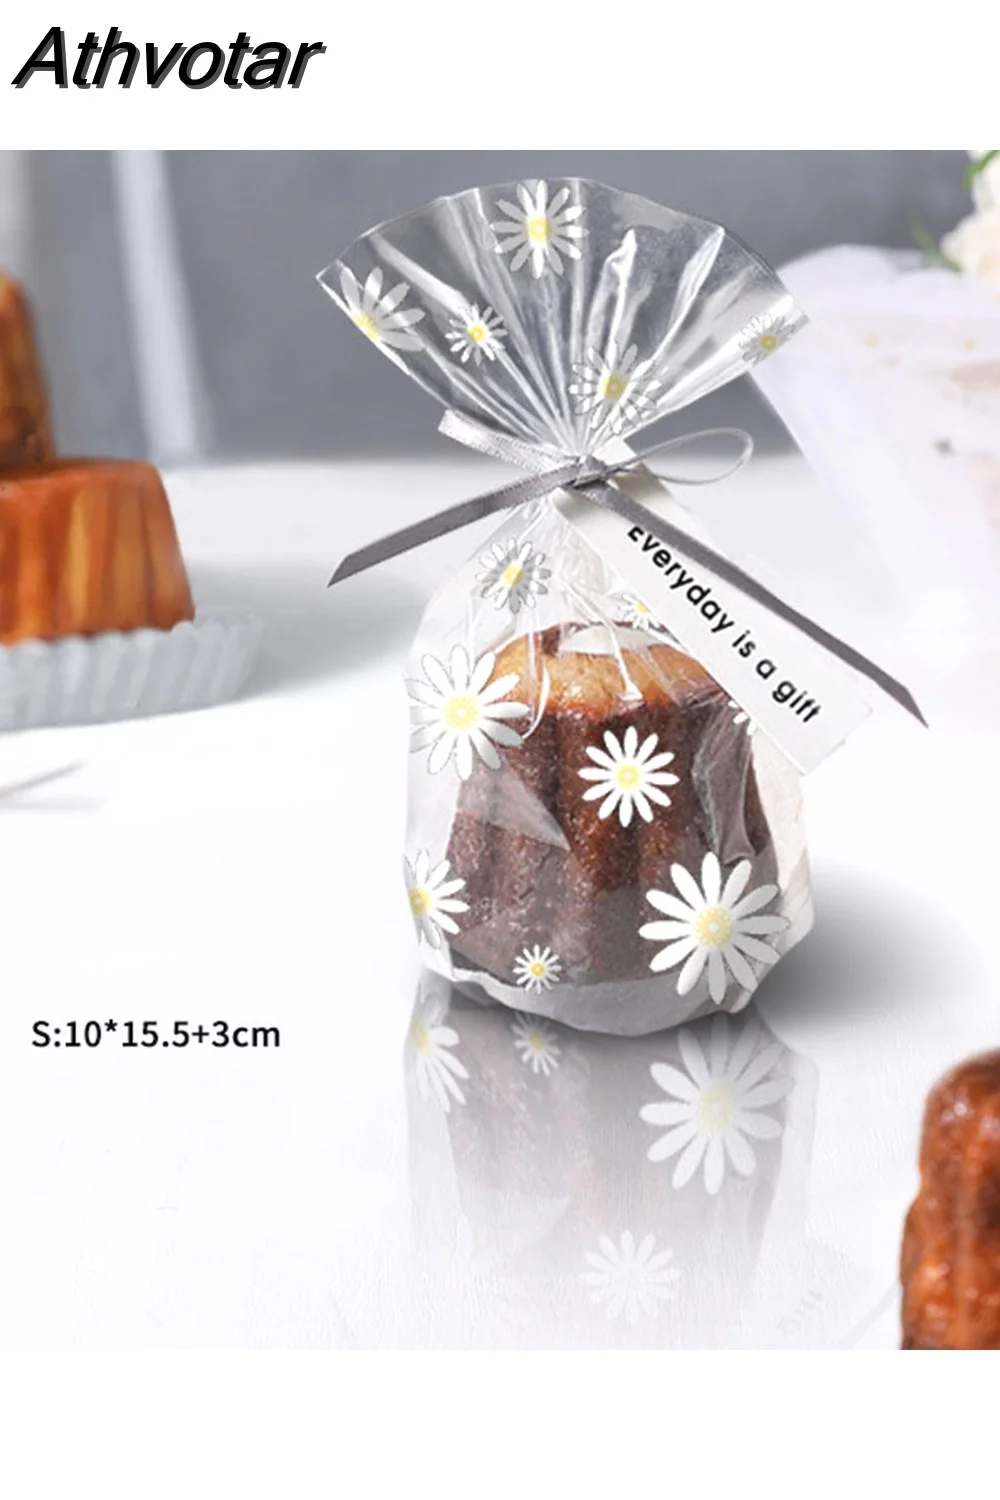 Athvotar Transparent Packaging Bags Xmas Gift Warp Cookie Chocolate Candy Storage Bag For Christmas Party Cellophane Gift Bags